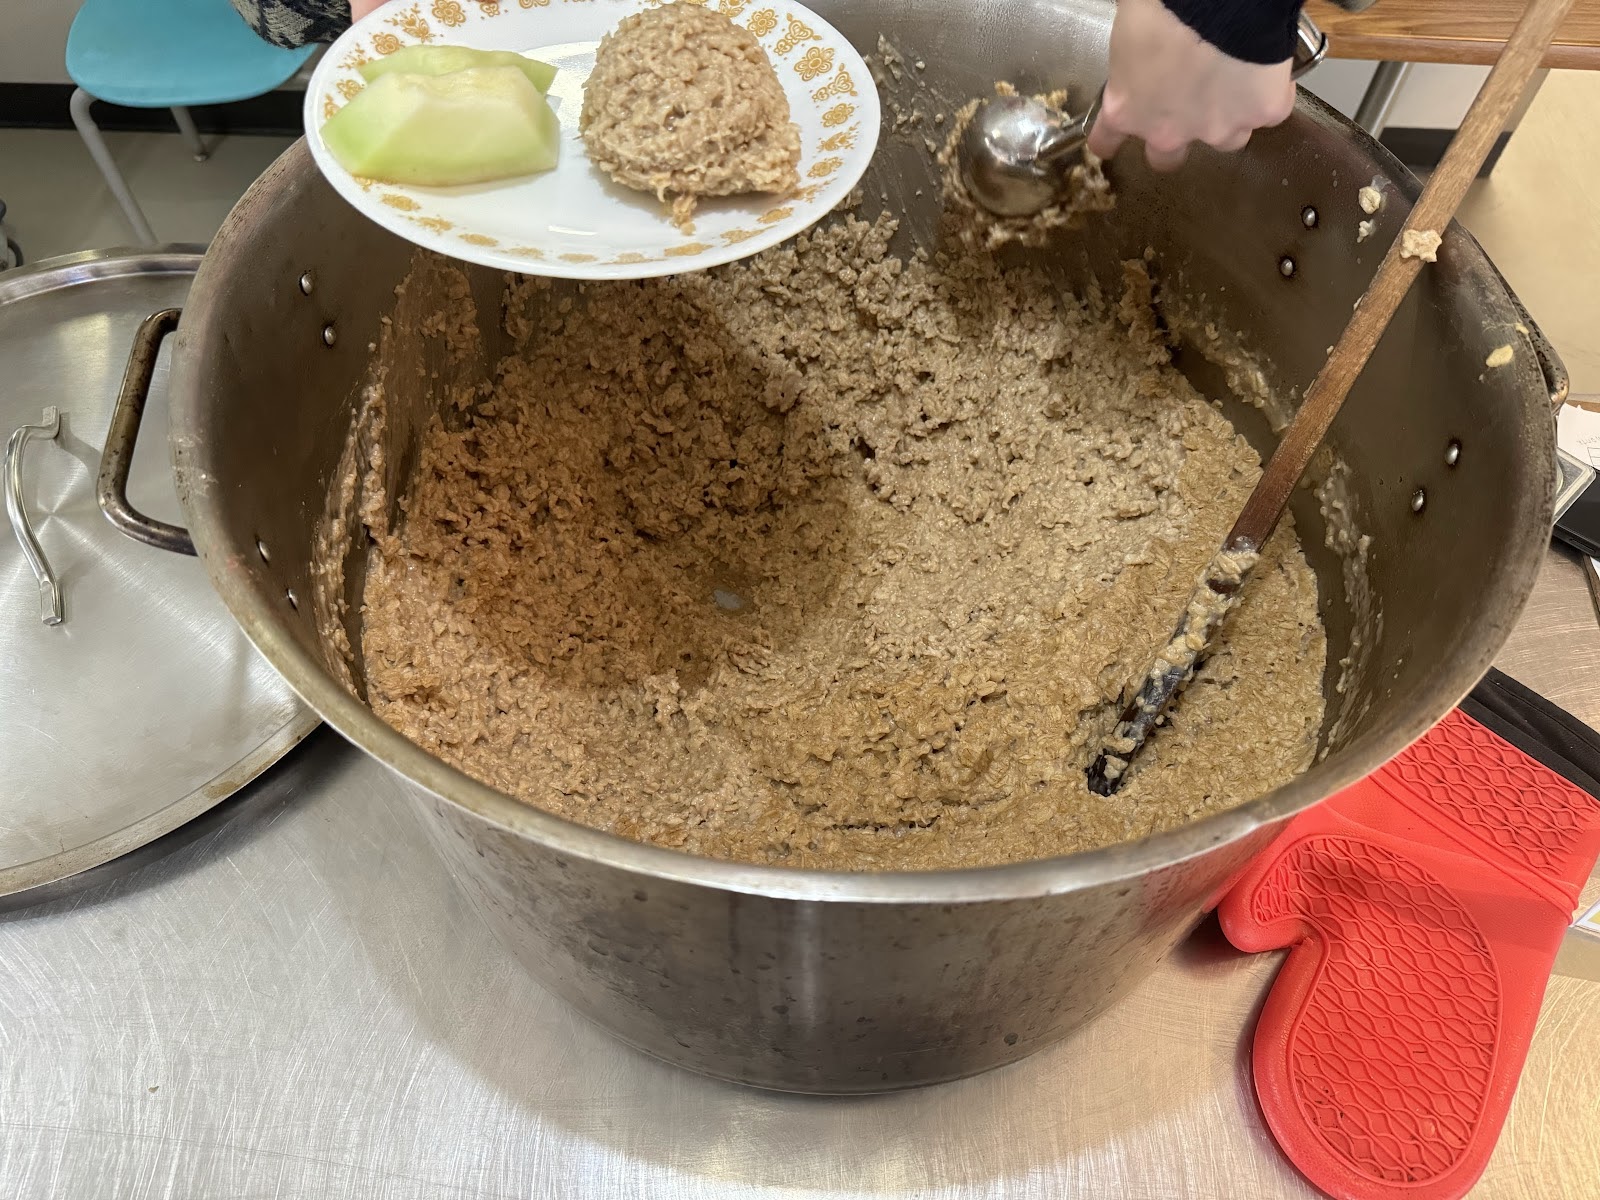 A small hand scoops from a big pot of oatmeal. There is a red oven mitt to the right.